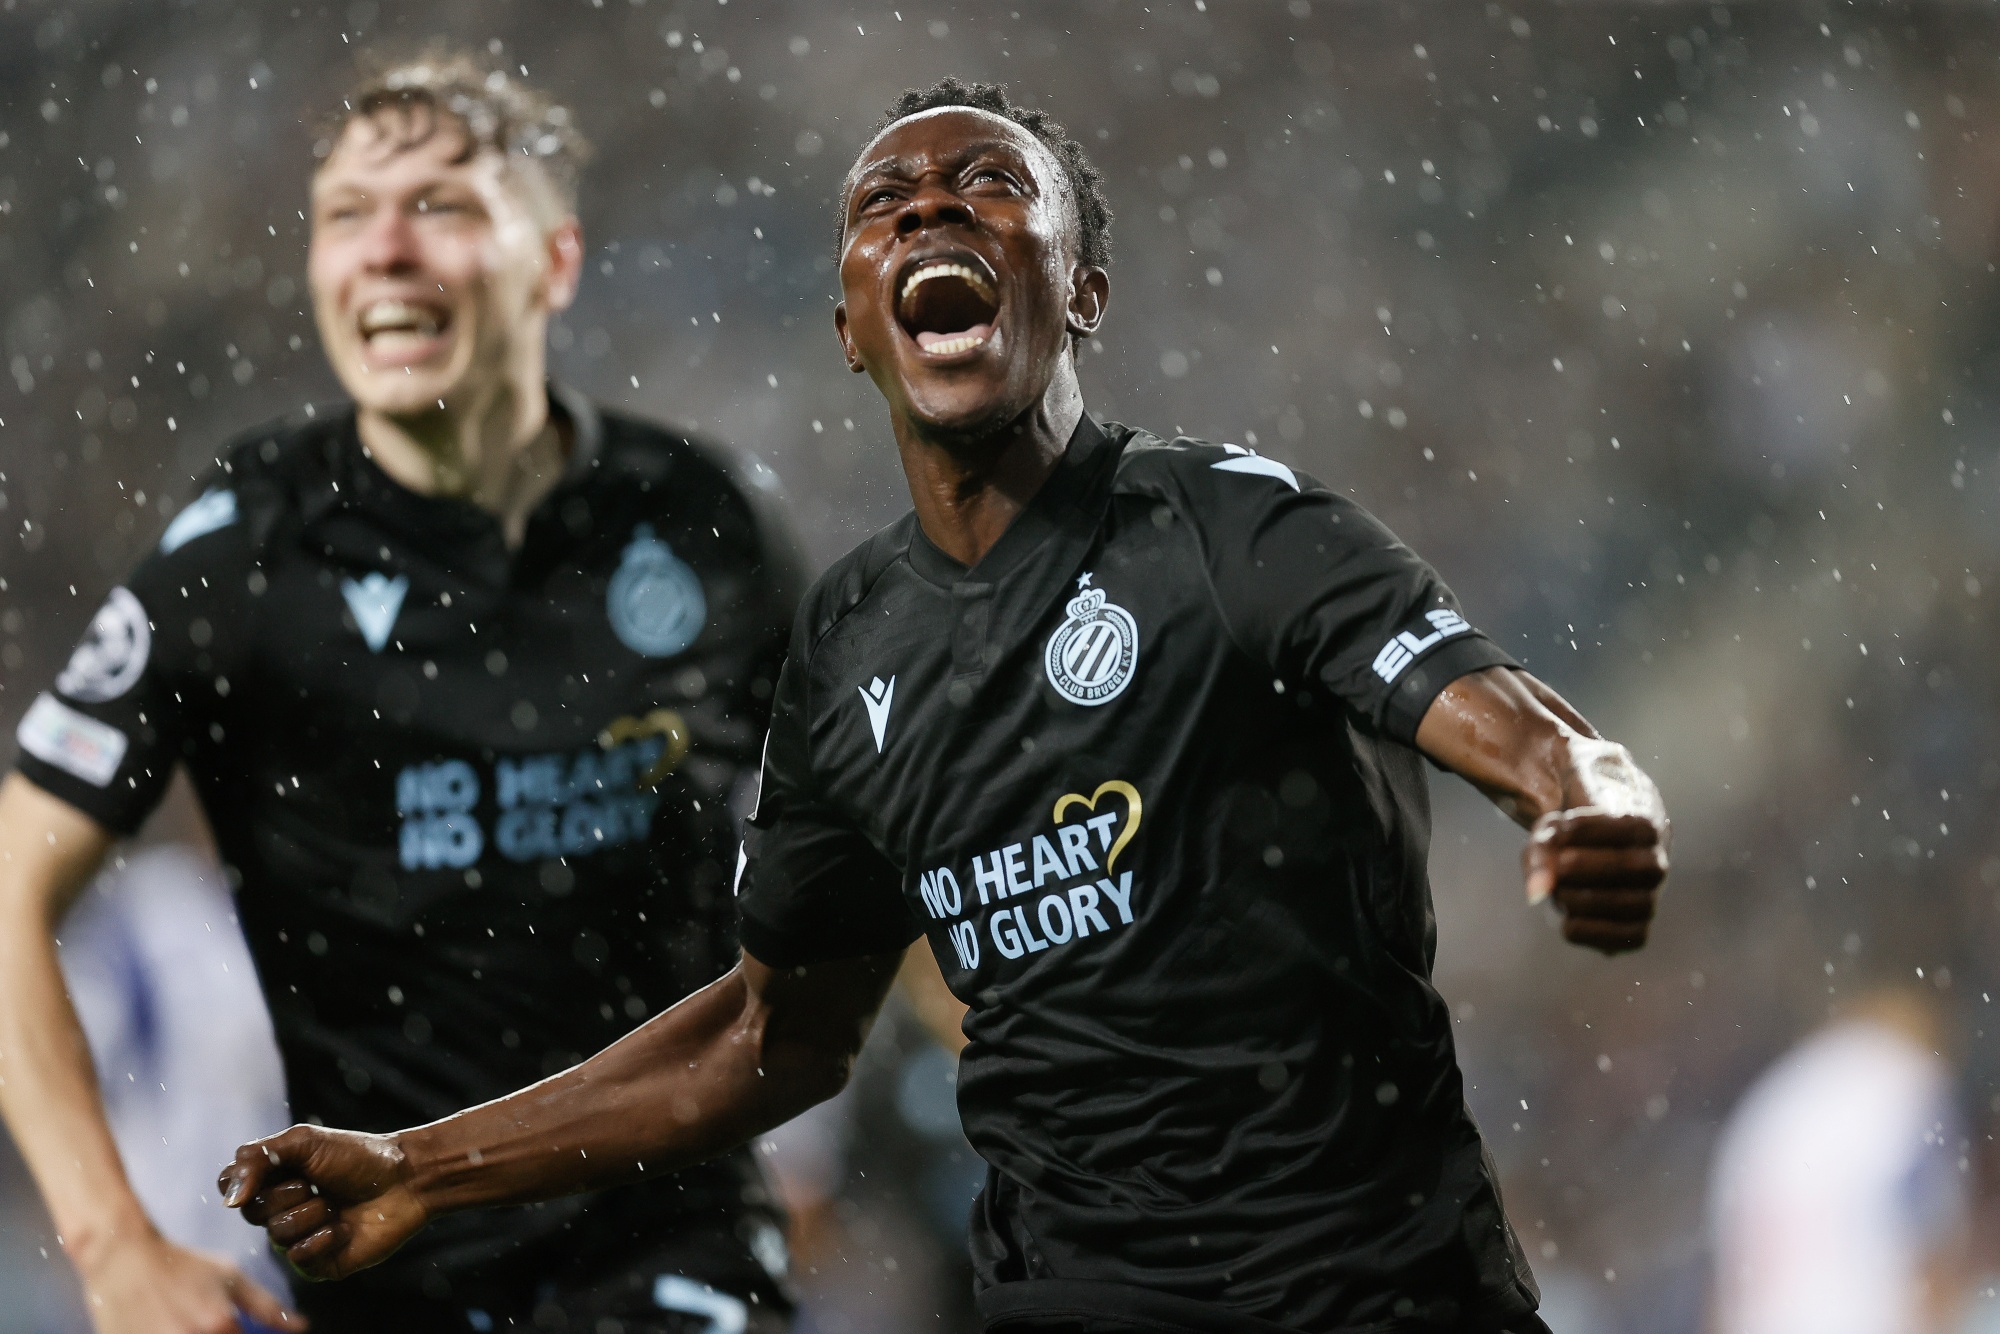 Club's Kamal Sowah celebrates after scoring during the match between Belgian soccer team Club Brugge KV and Portuguese FC Porto, Tuesday 13 September 2022 in Porto, Portugal, the second game in the UEFA Champions League group stage. BELGA PHOTO BRUNO FAHY